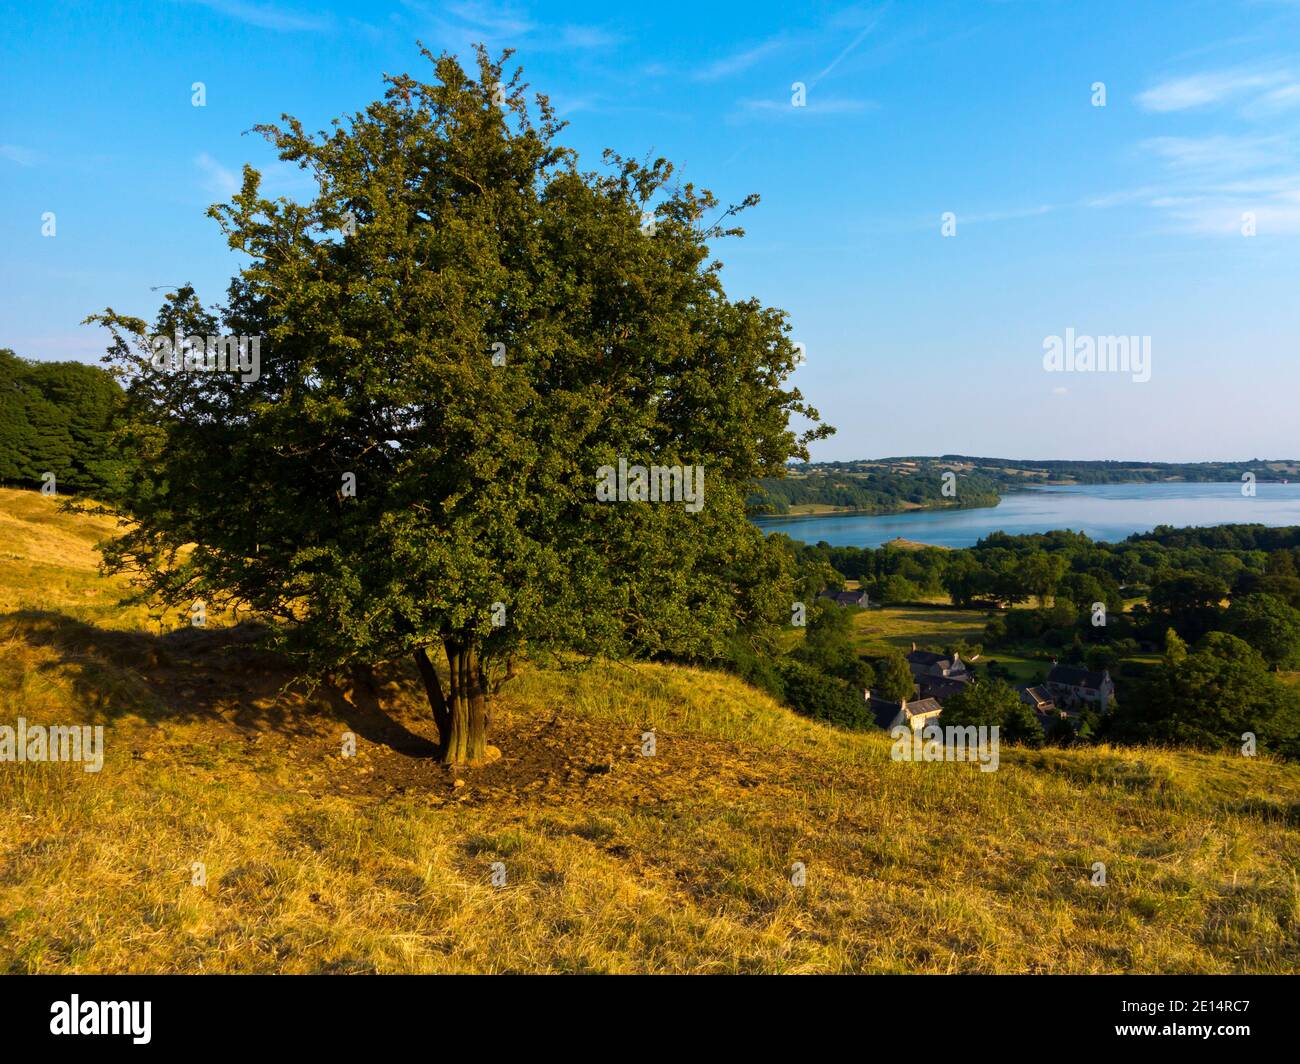 Summer landscape with trees and Carsington Water beyond at Carsington Pastures in the Derbyshire Dales area of the Peak District England UK Stock Photo